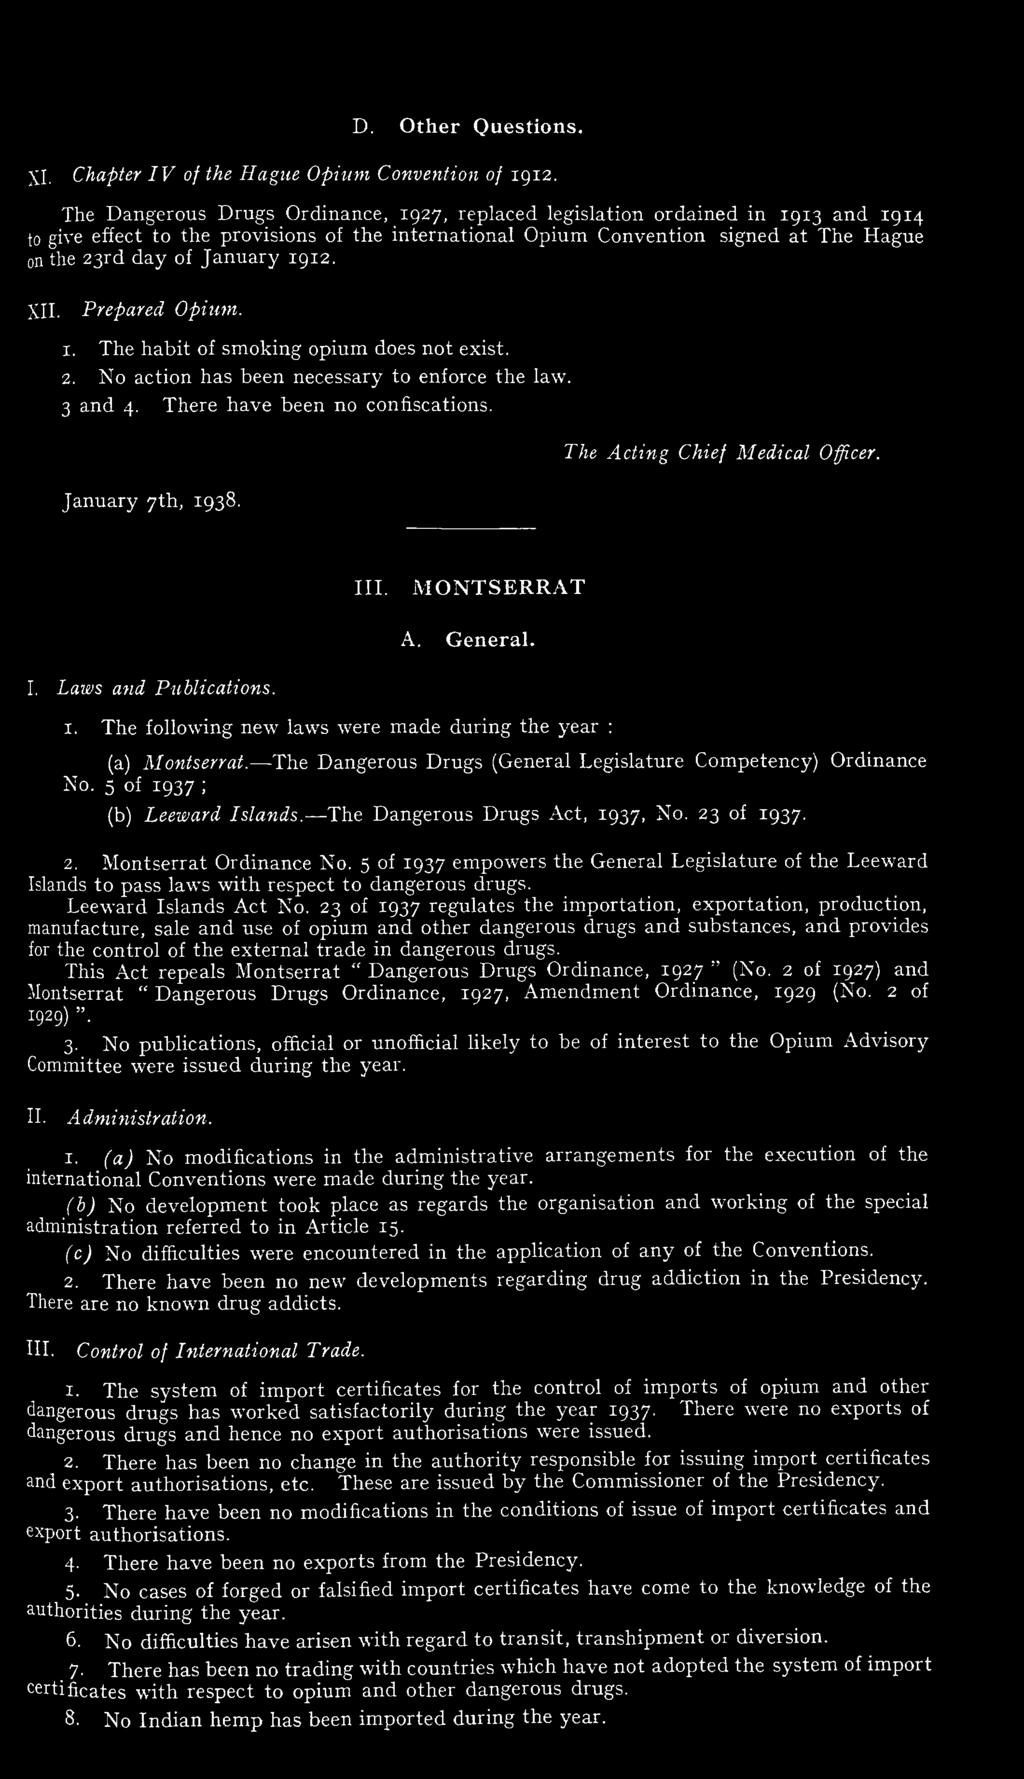 January 1912. XII. Prepared Opium. 1. The habit of smoking opium does not exist. 2. No action has been necessary to enforce the law. 3 and 4. There have been no confiscations. January 7th, 1938.